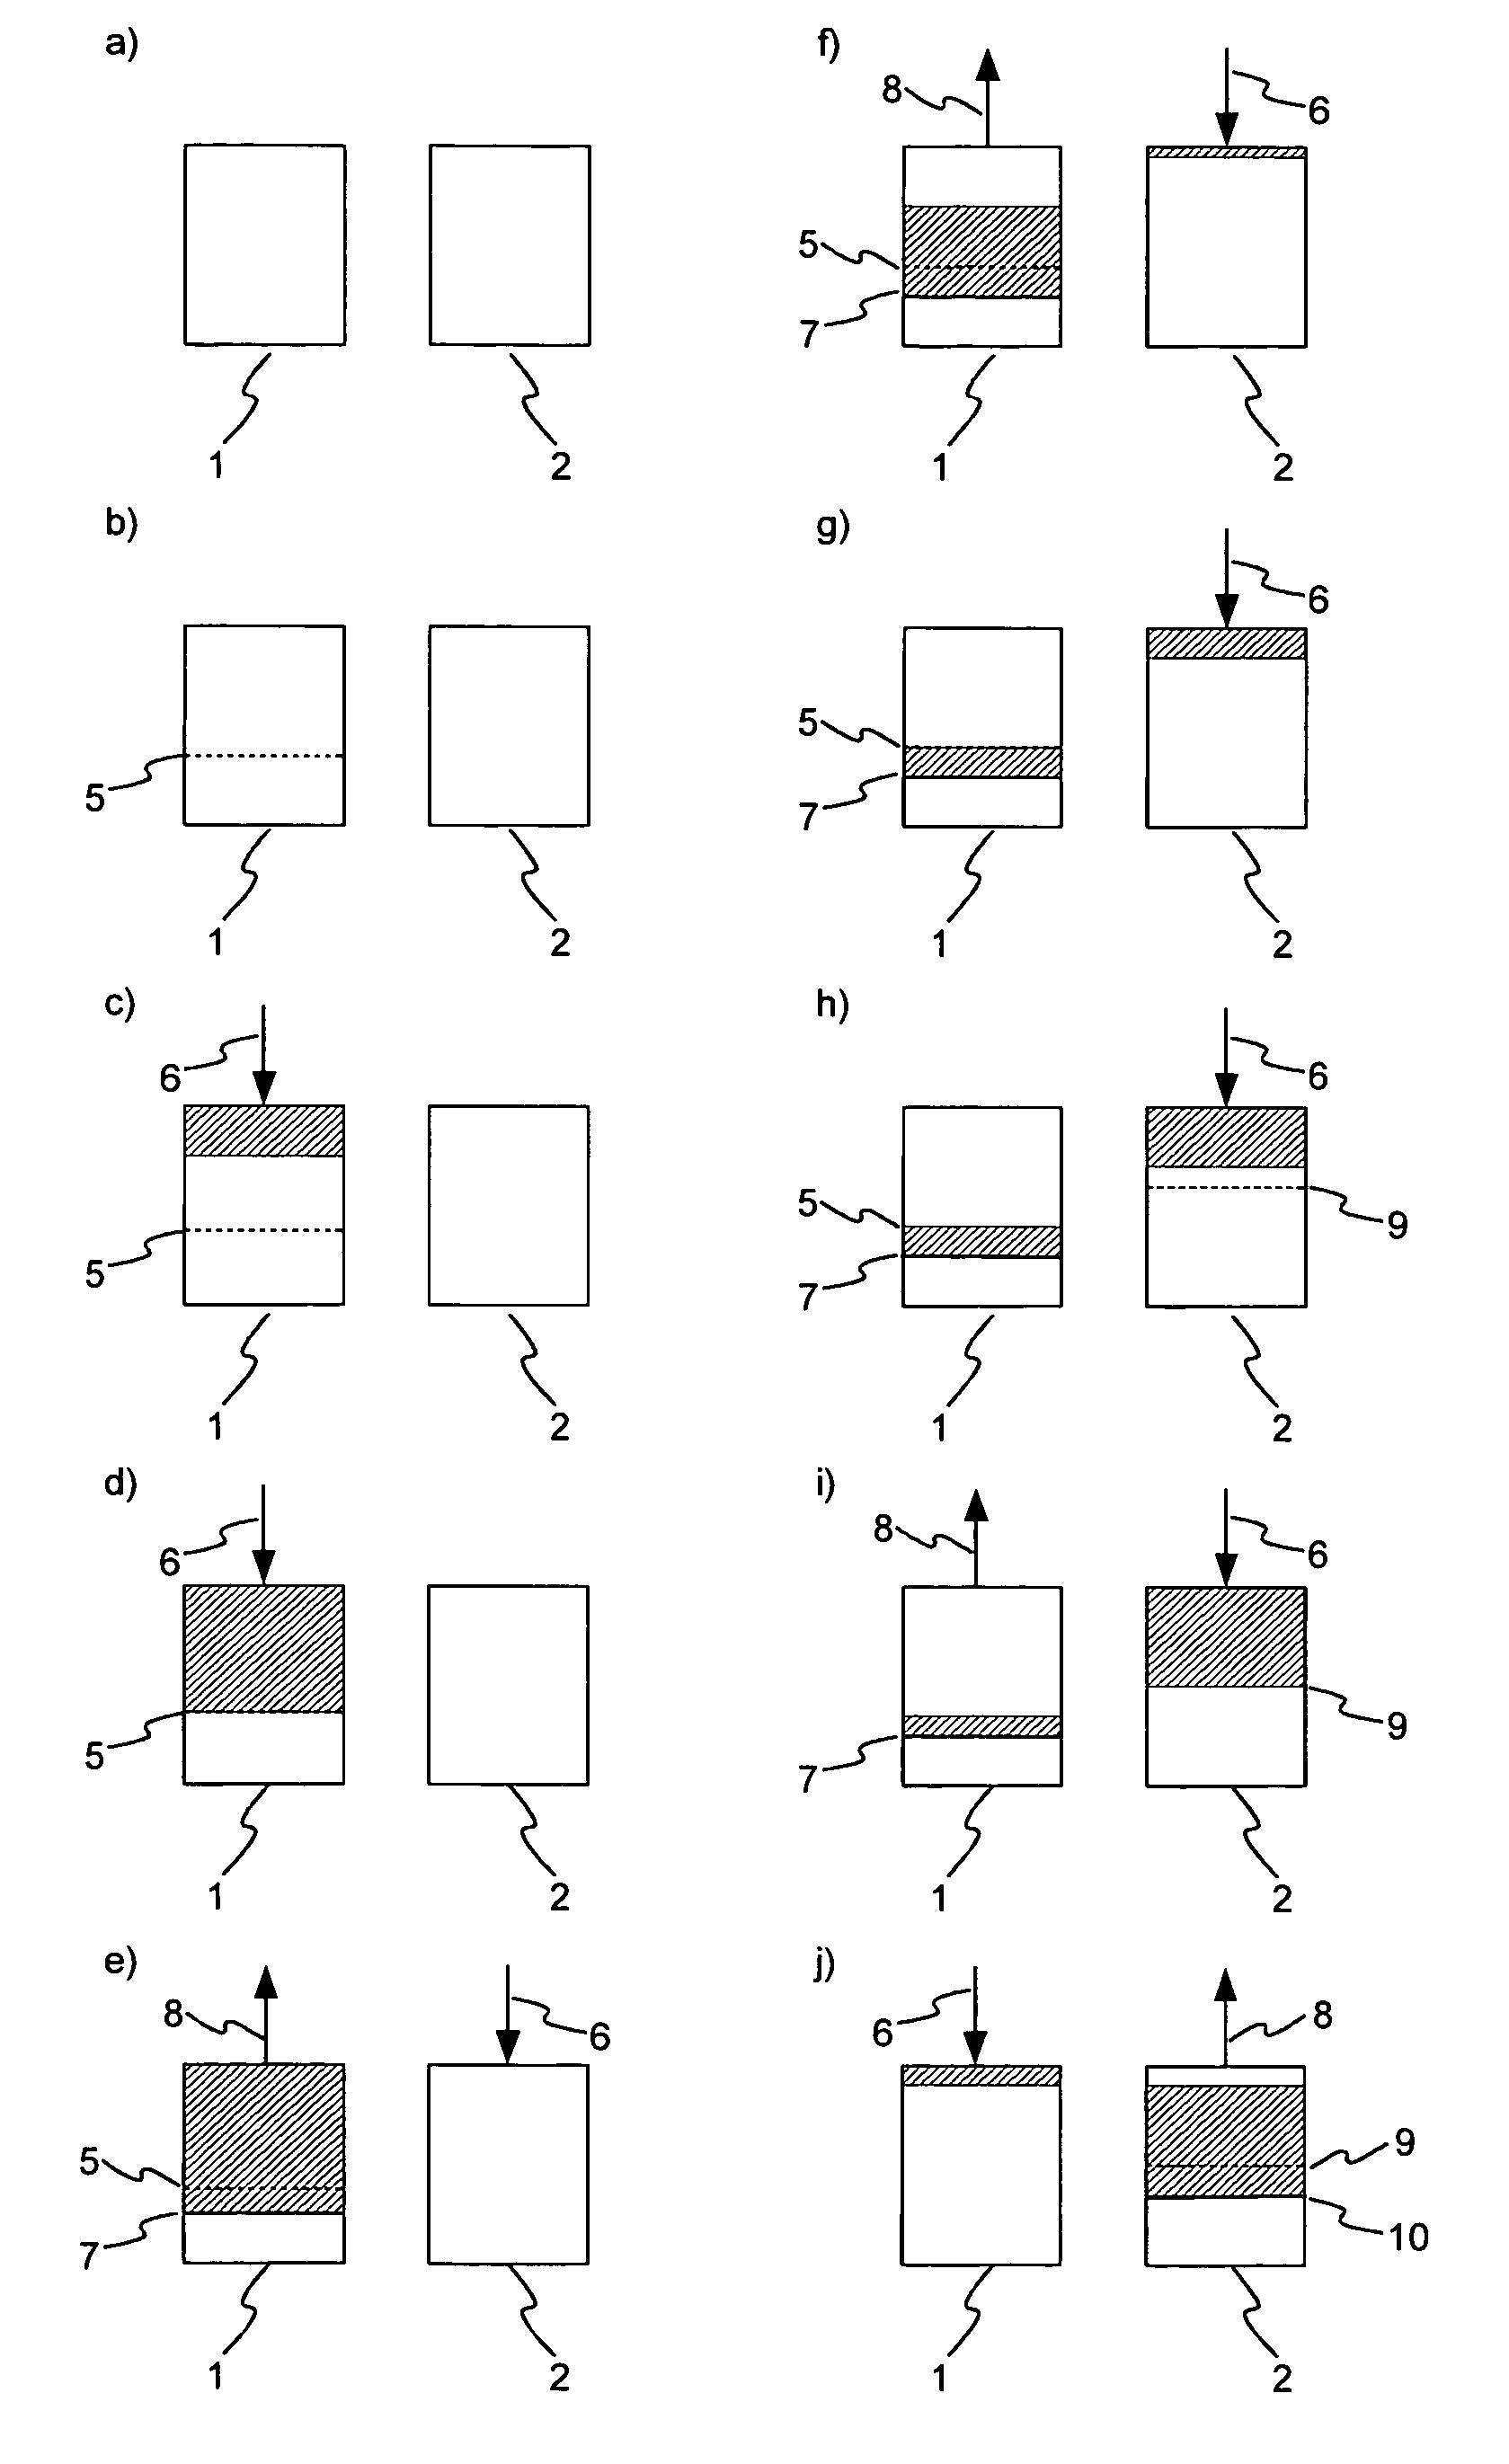 Method for controlling access to a multibank memory